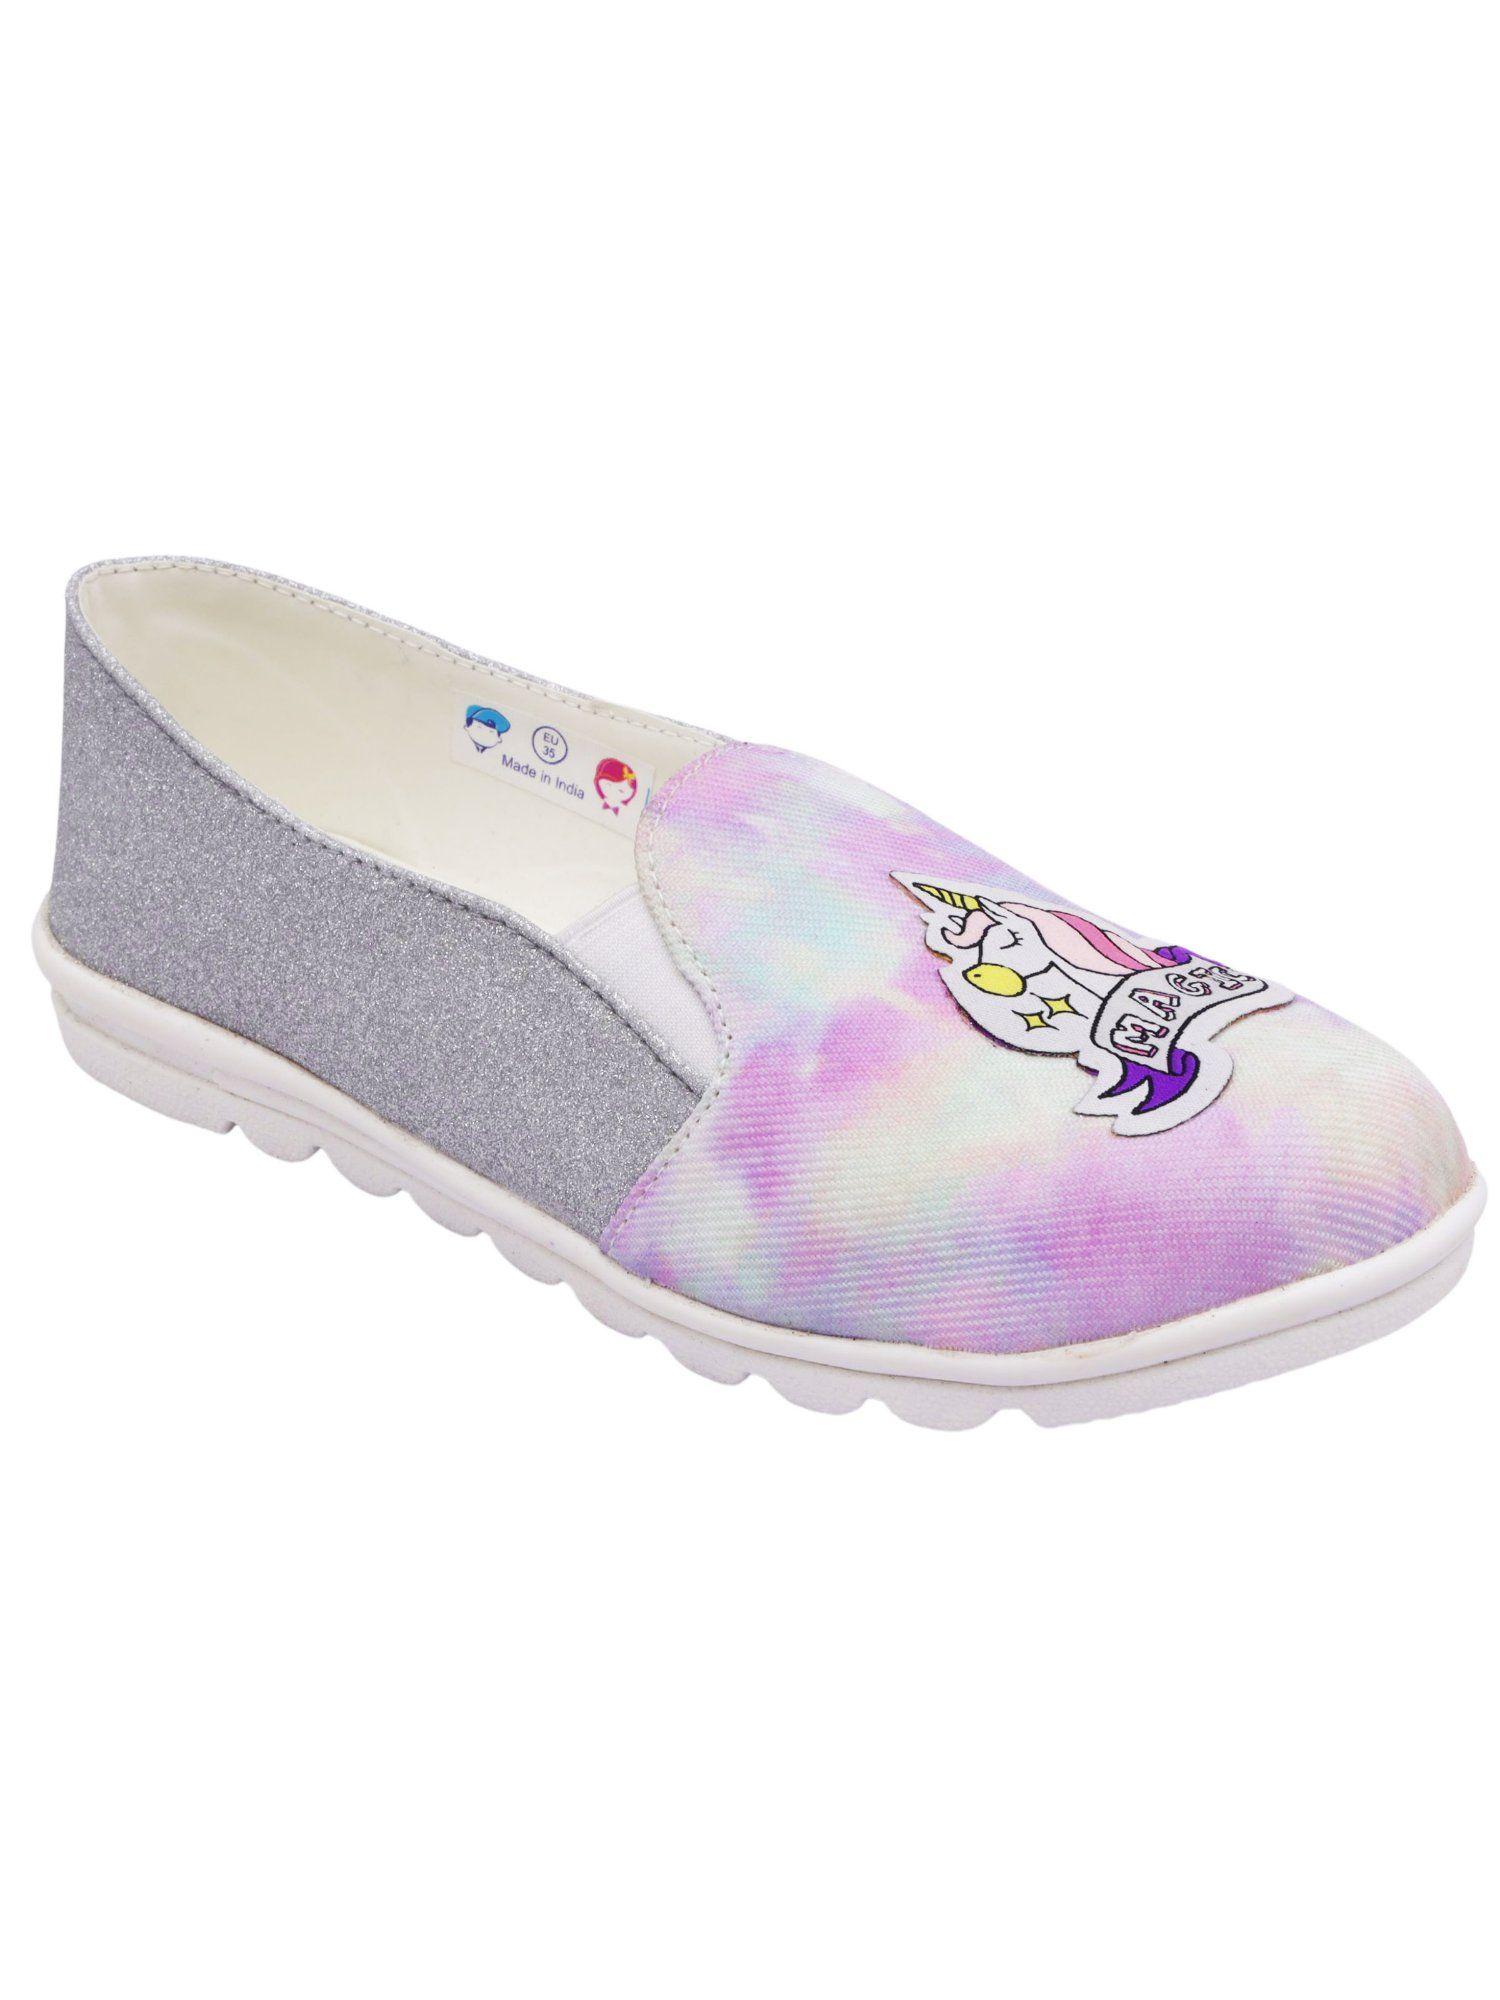 lavender tie and die slip-on shoes for girls with unicorn applique